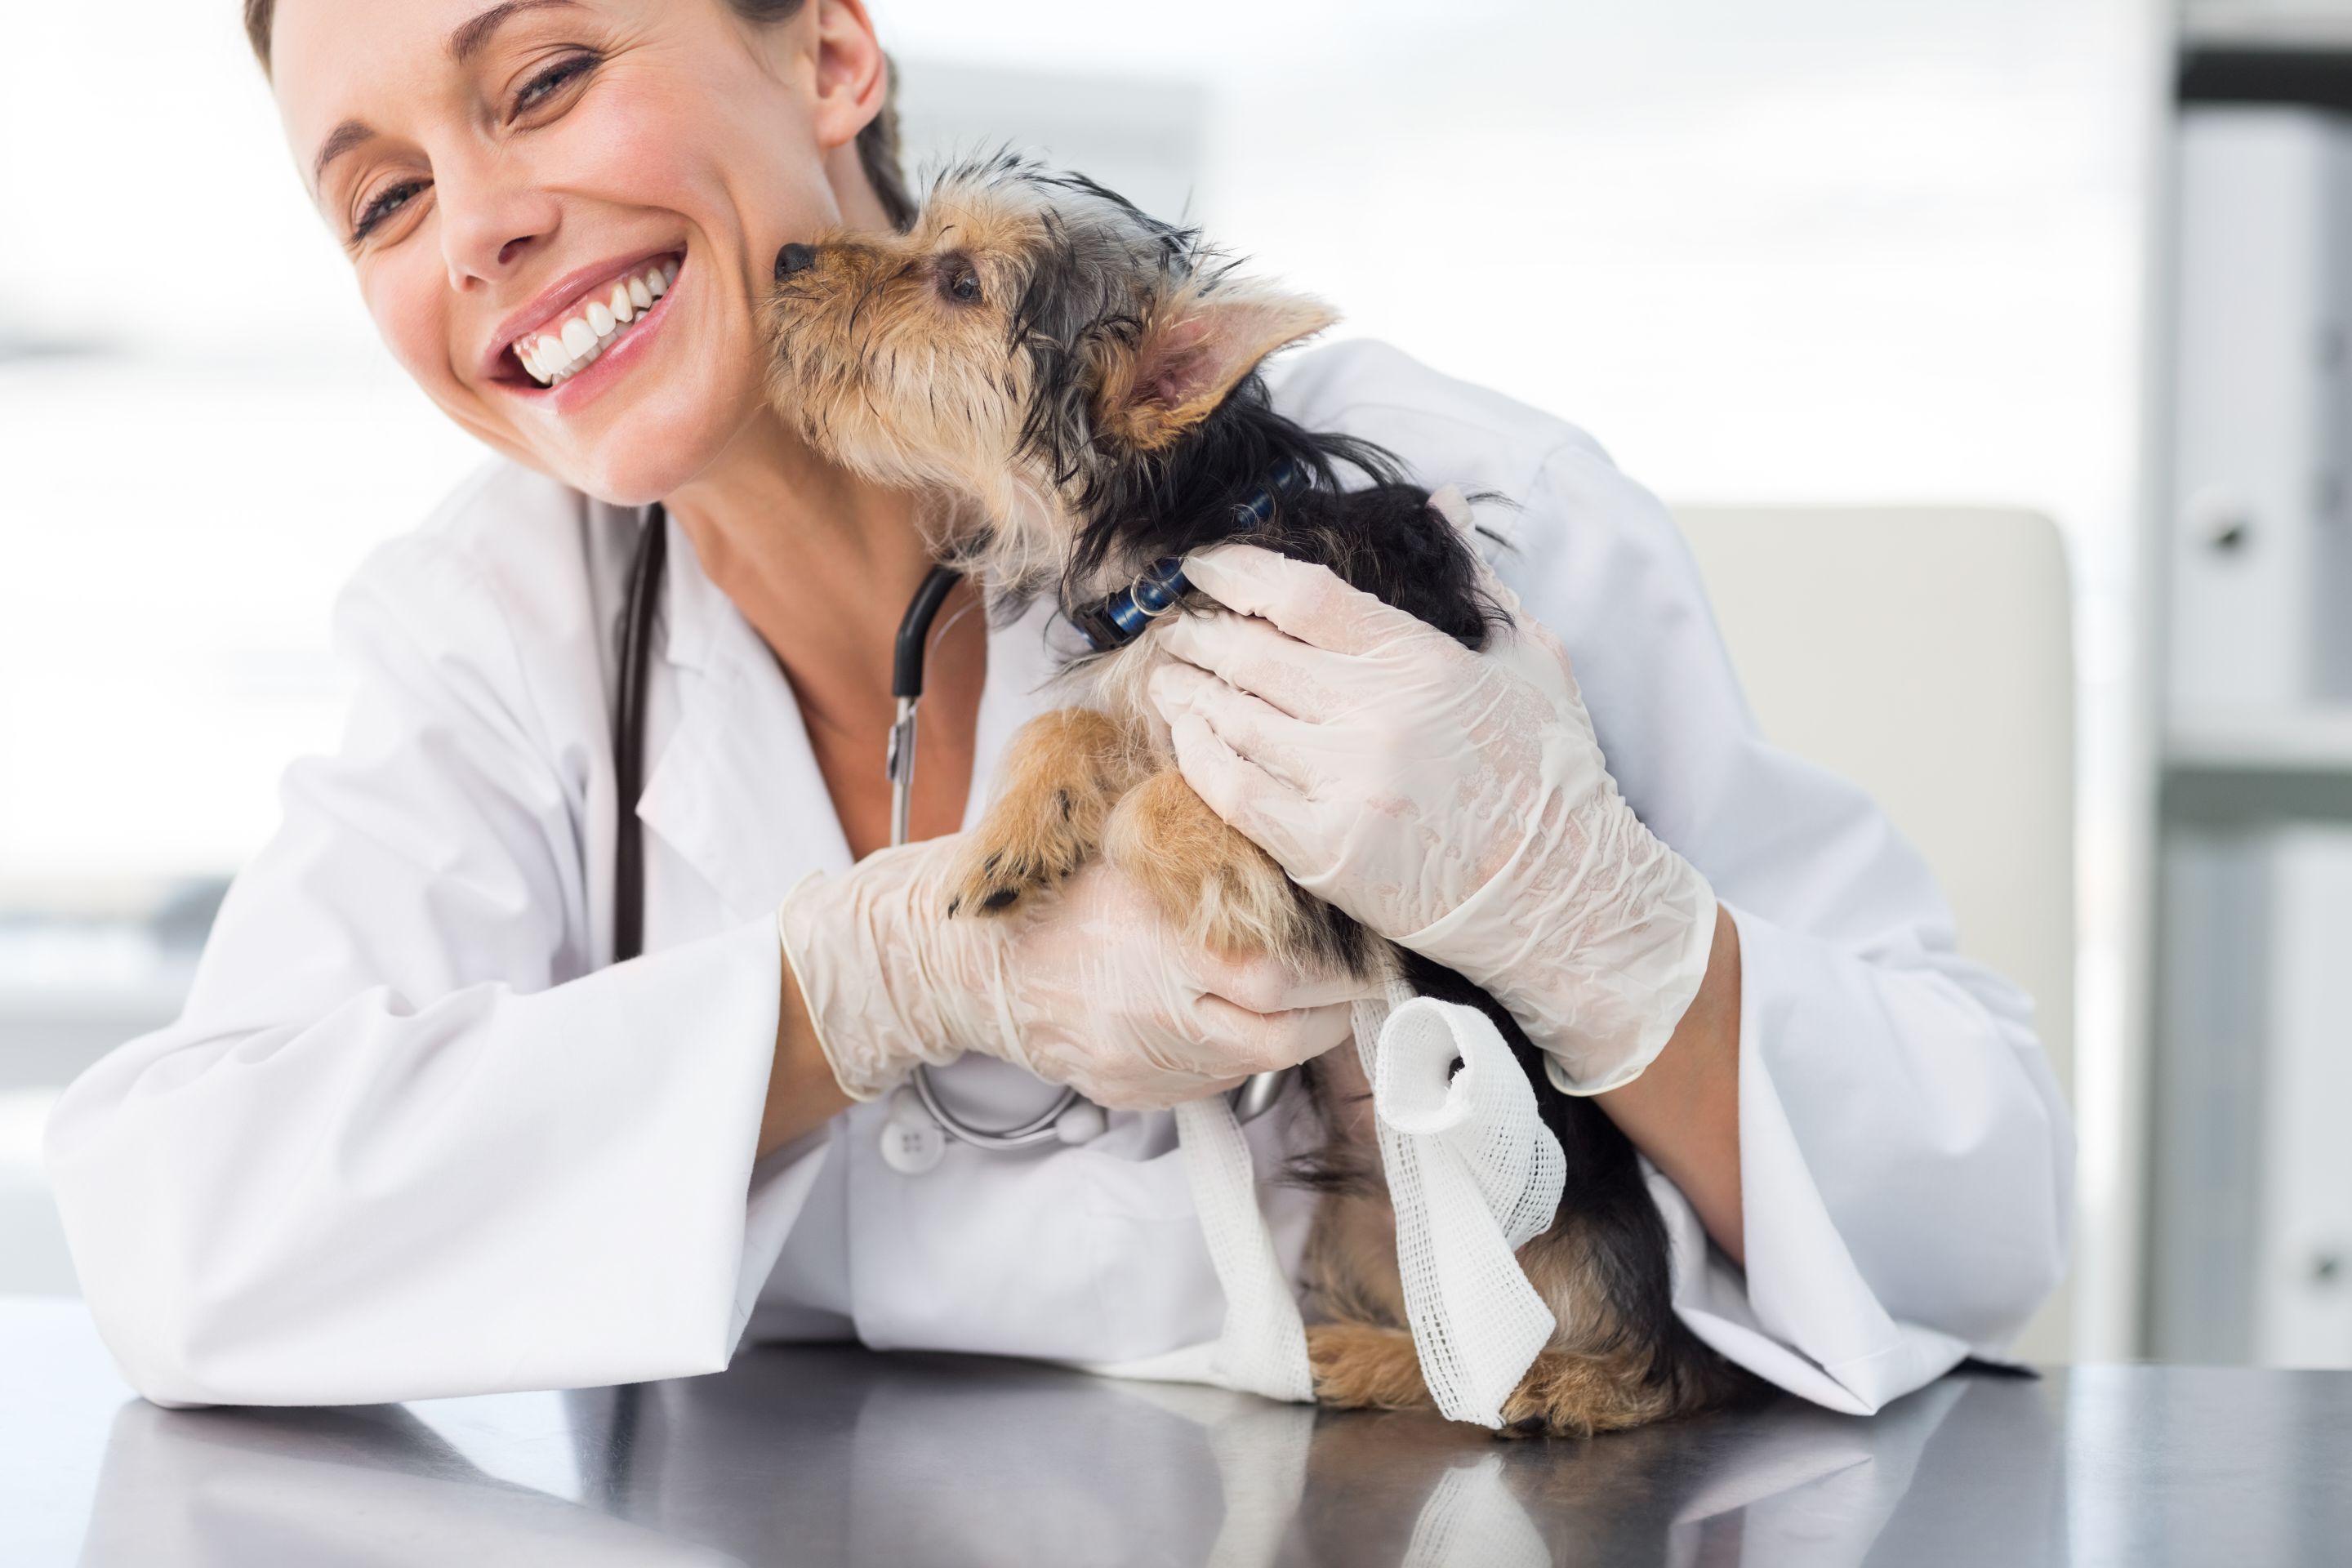 How to Find the Best Animal Doctor | SmartGuy